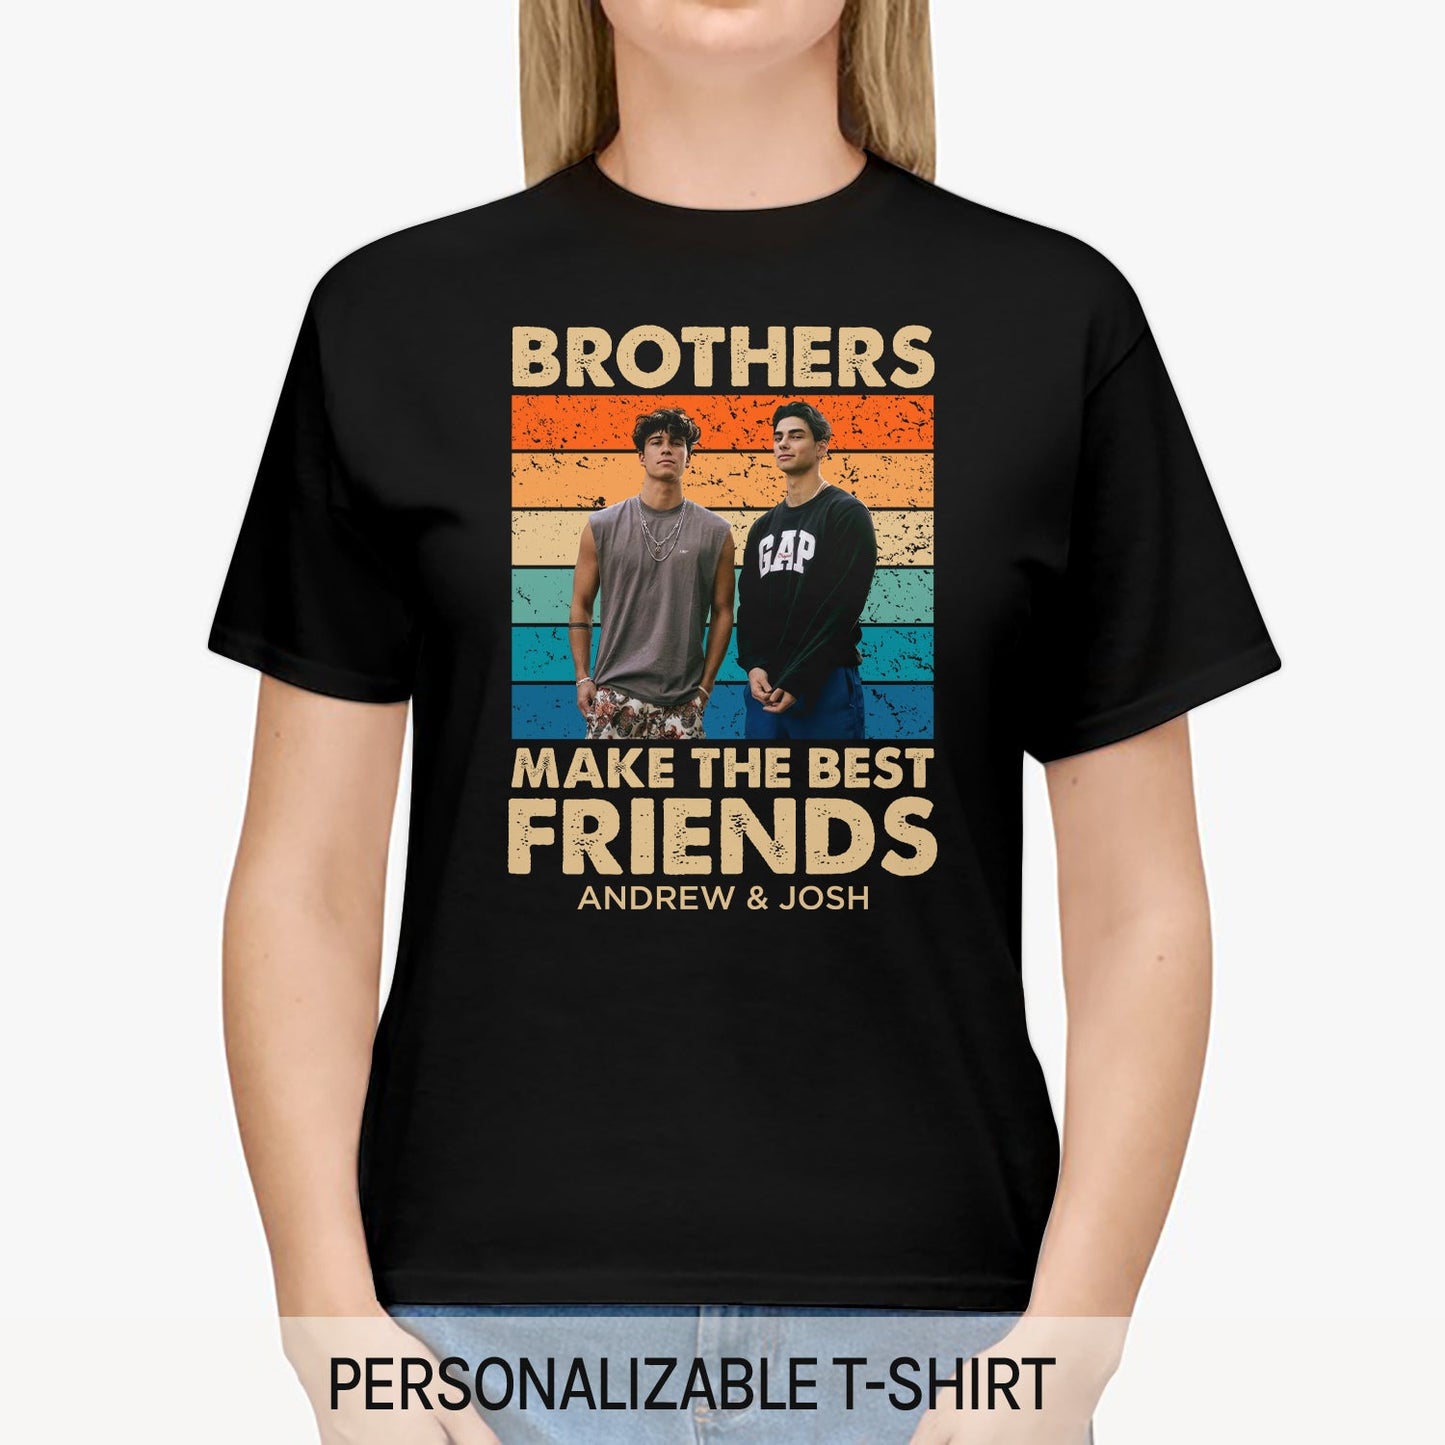 Brothers Make The Best Friends - Personalized Birthday or Christmas gift For Brother - Custom Tshirt - MyMindfulGifts